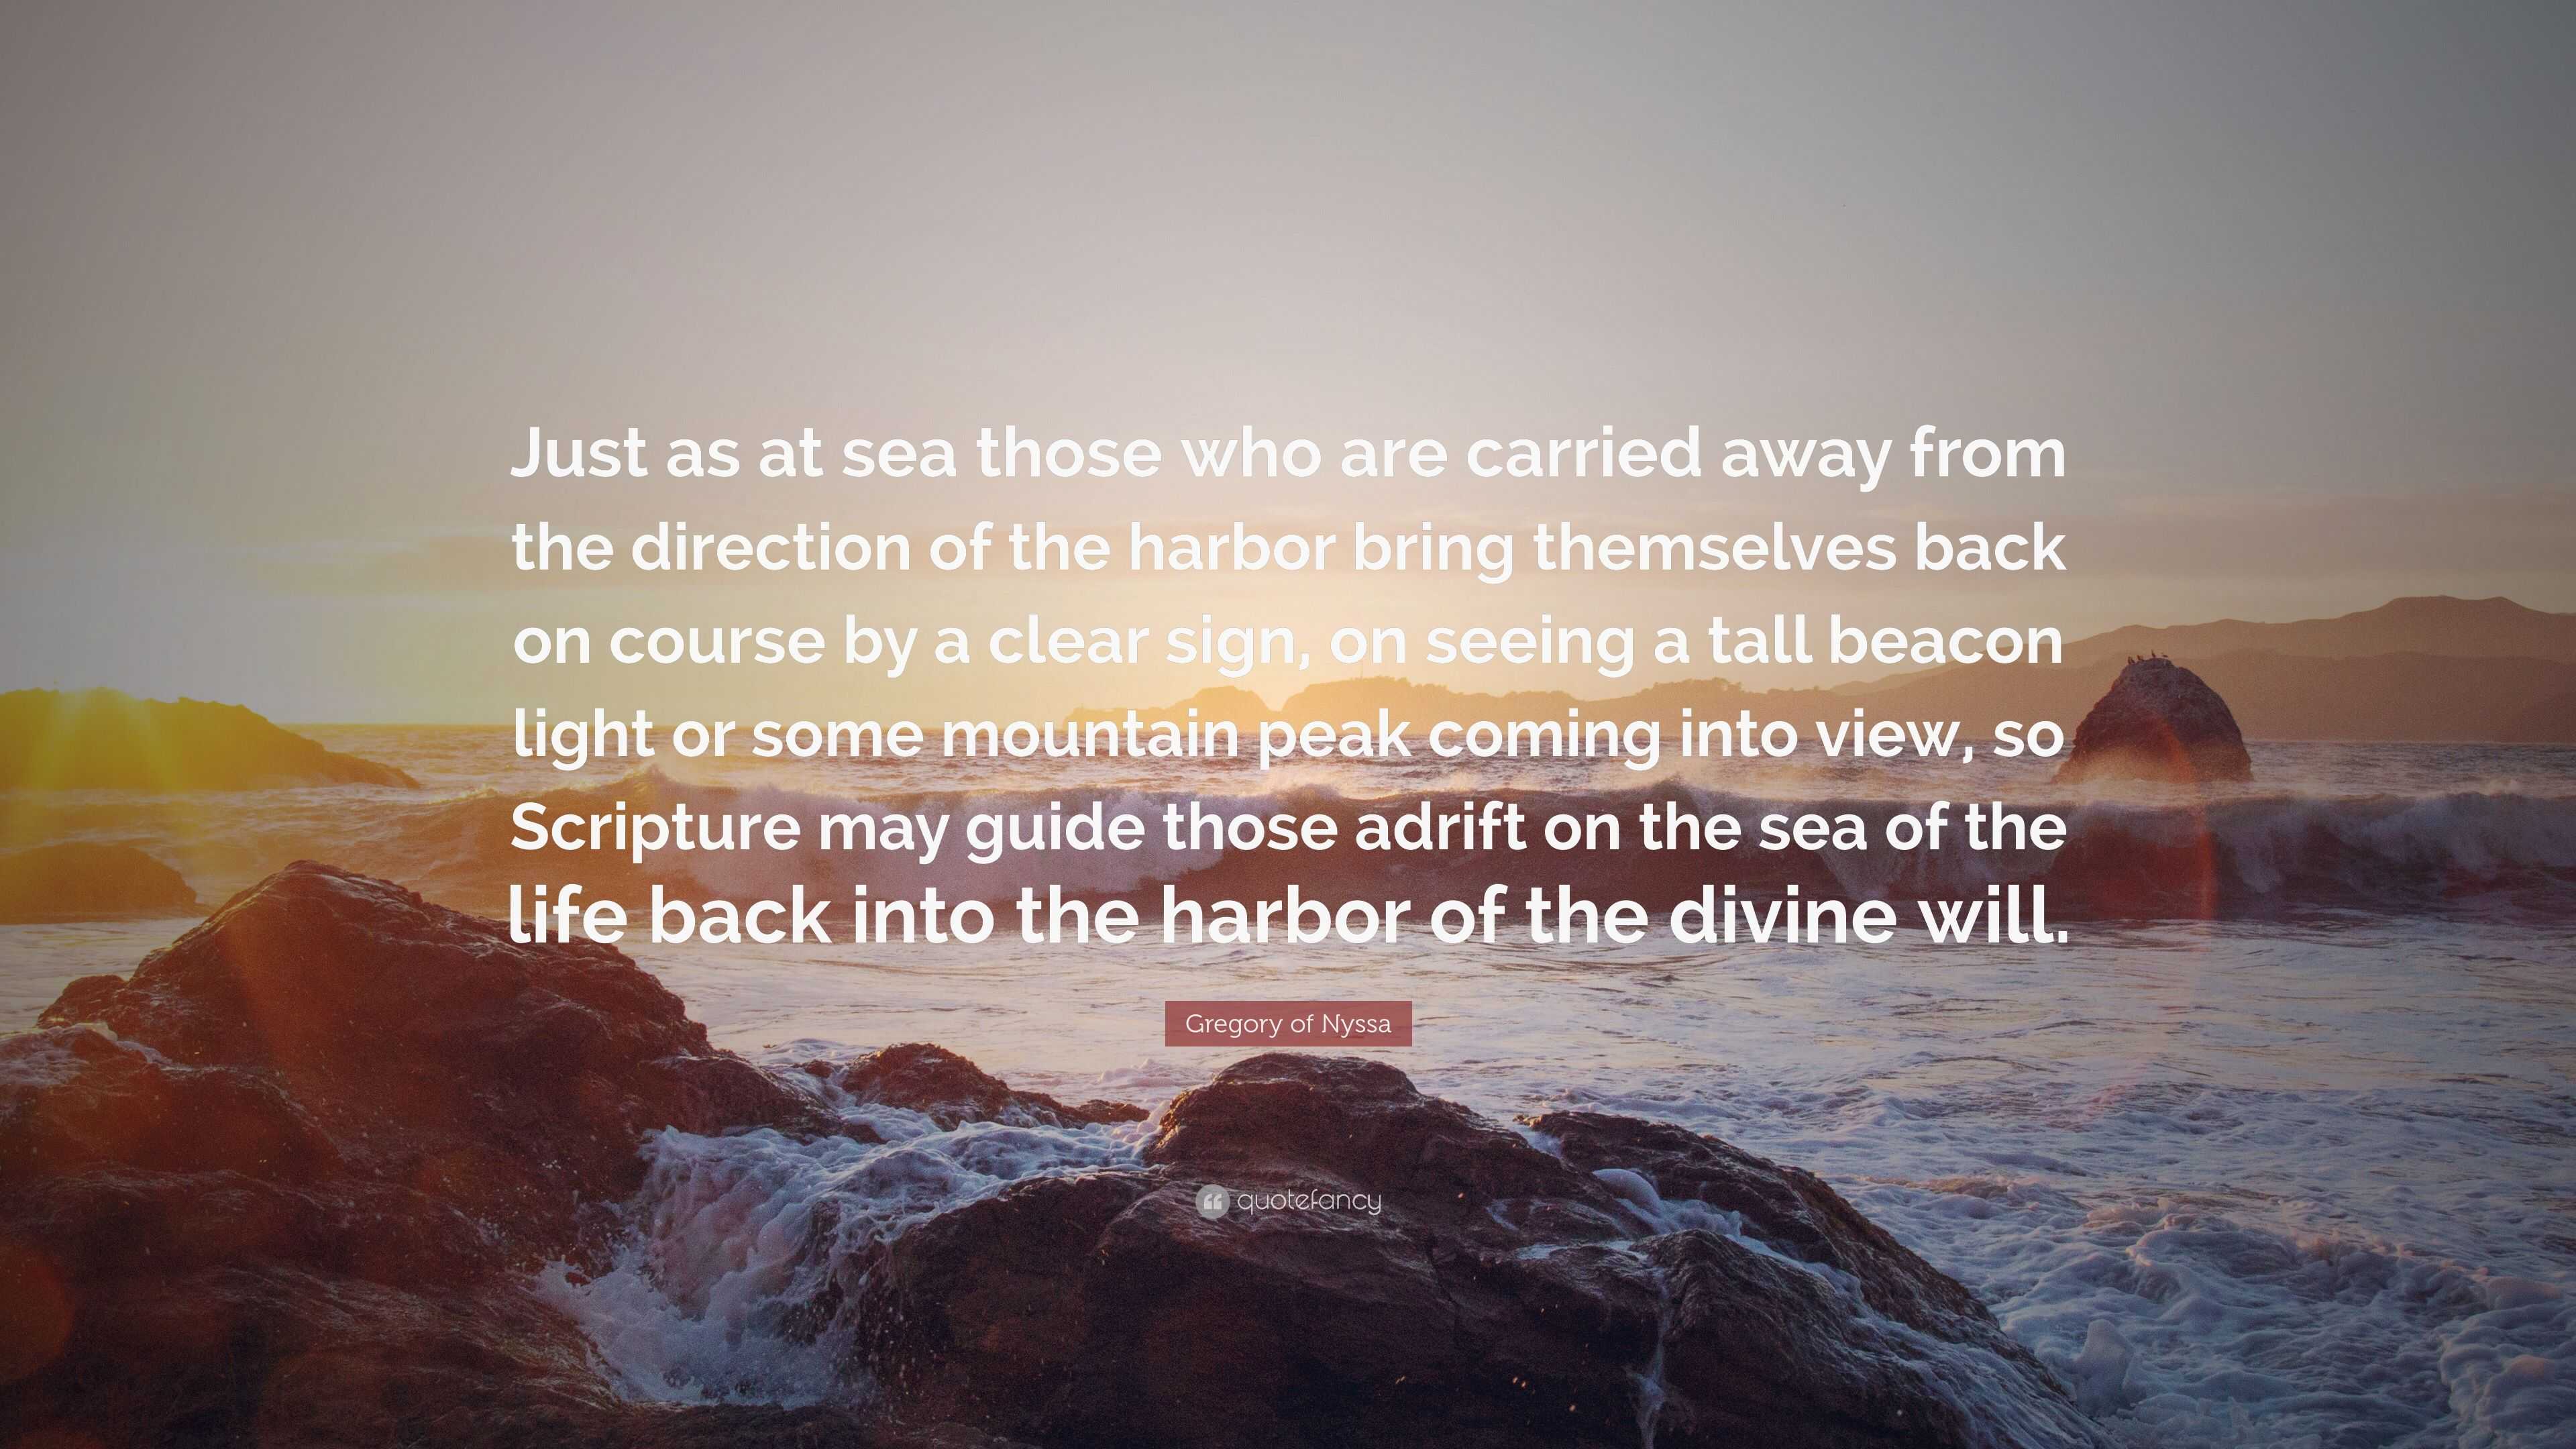 Gregory of Nyssa Quote: “Just as at sea those who are carried away